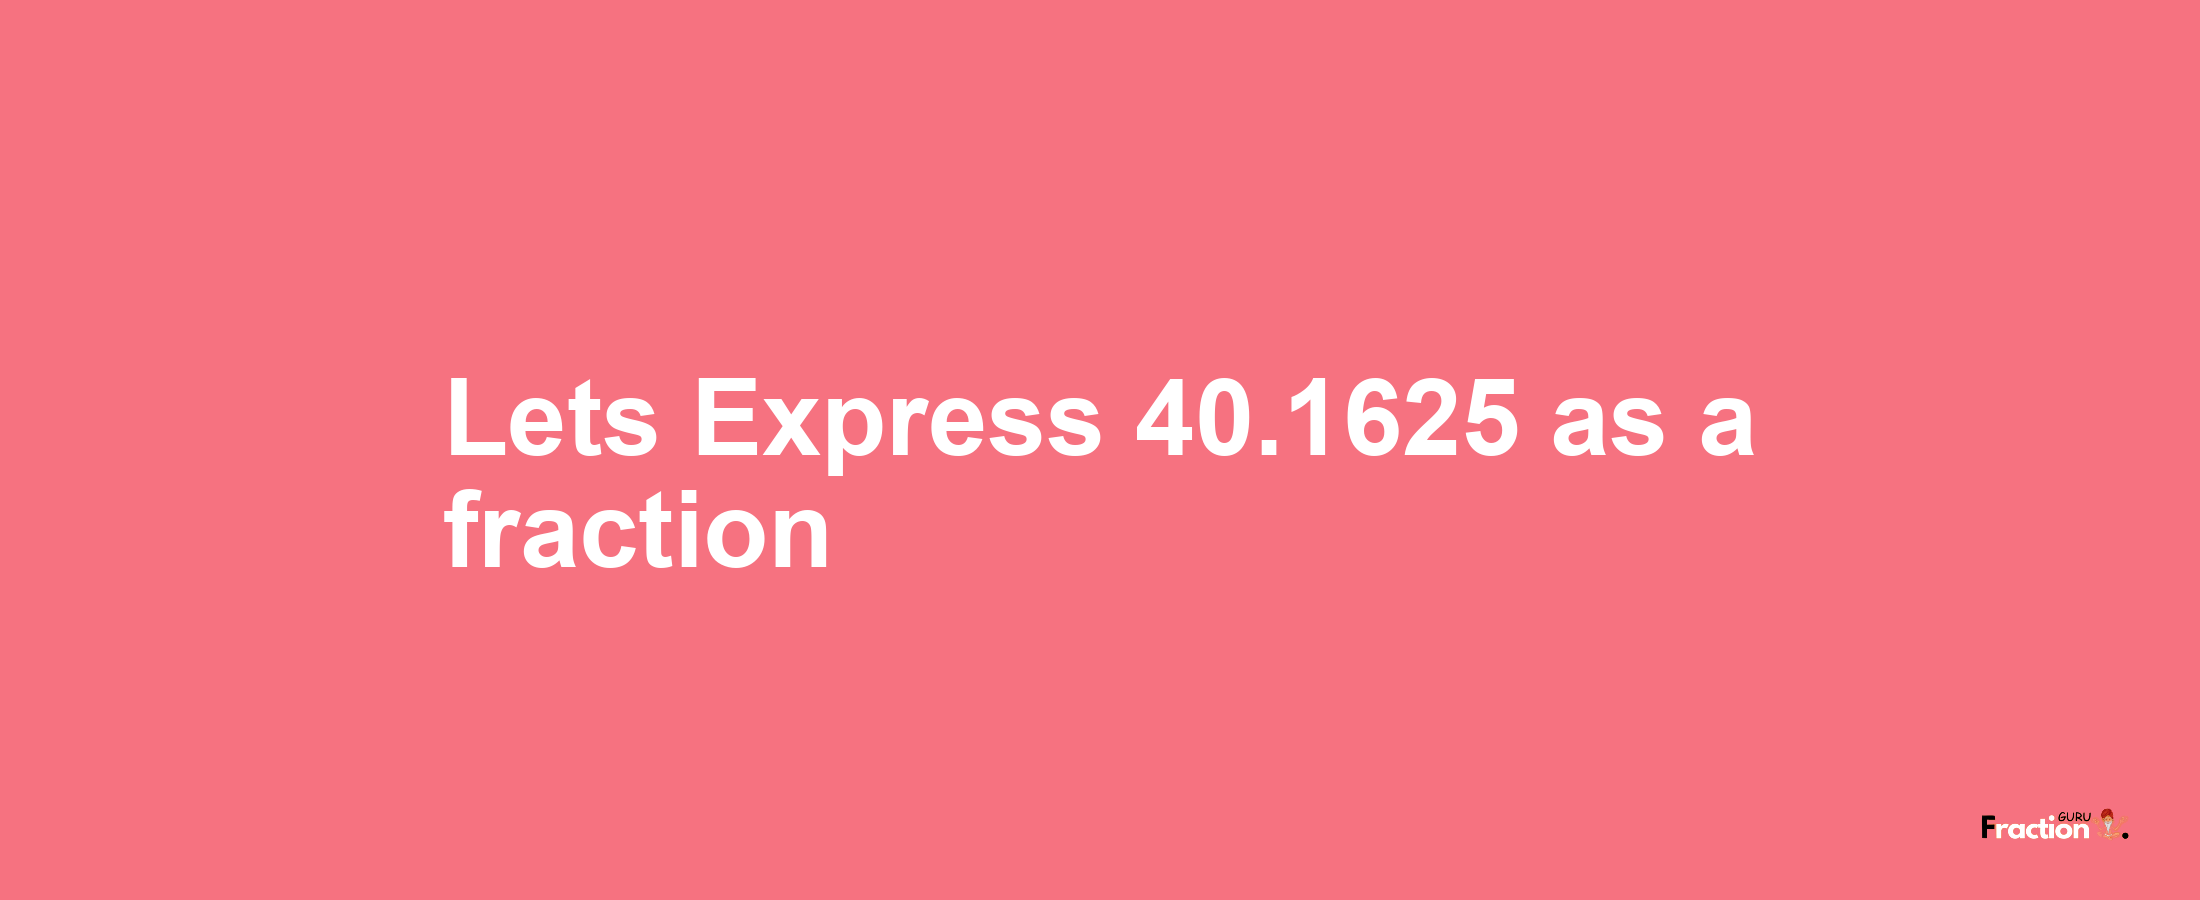 Lets Express 40.1625 as afraction